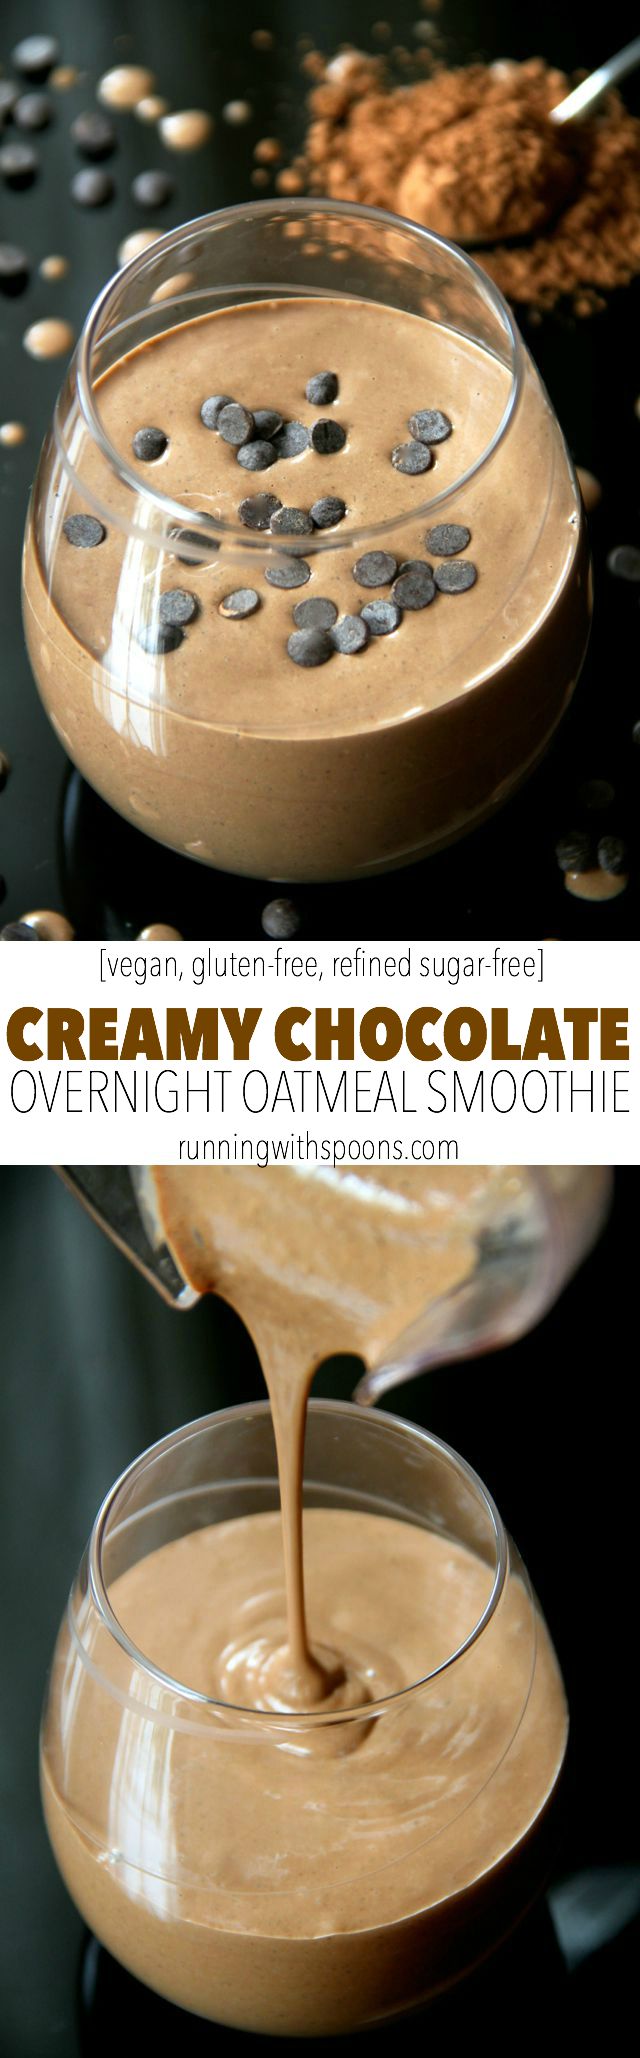 Chocolate Overnight Oatmeal Smoothie -- smooth, creamy, and sure to keep you satisfied for hours! This vegan smoothie will knock out those chocolate cravings while providing you with a balanced breakfast or snack || runningwithspoons.com #vegan #healthy